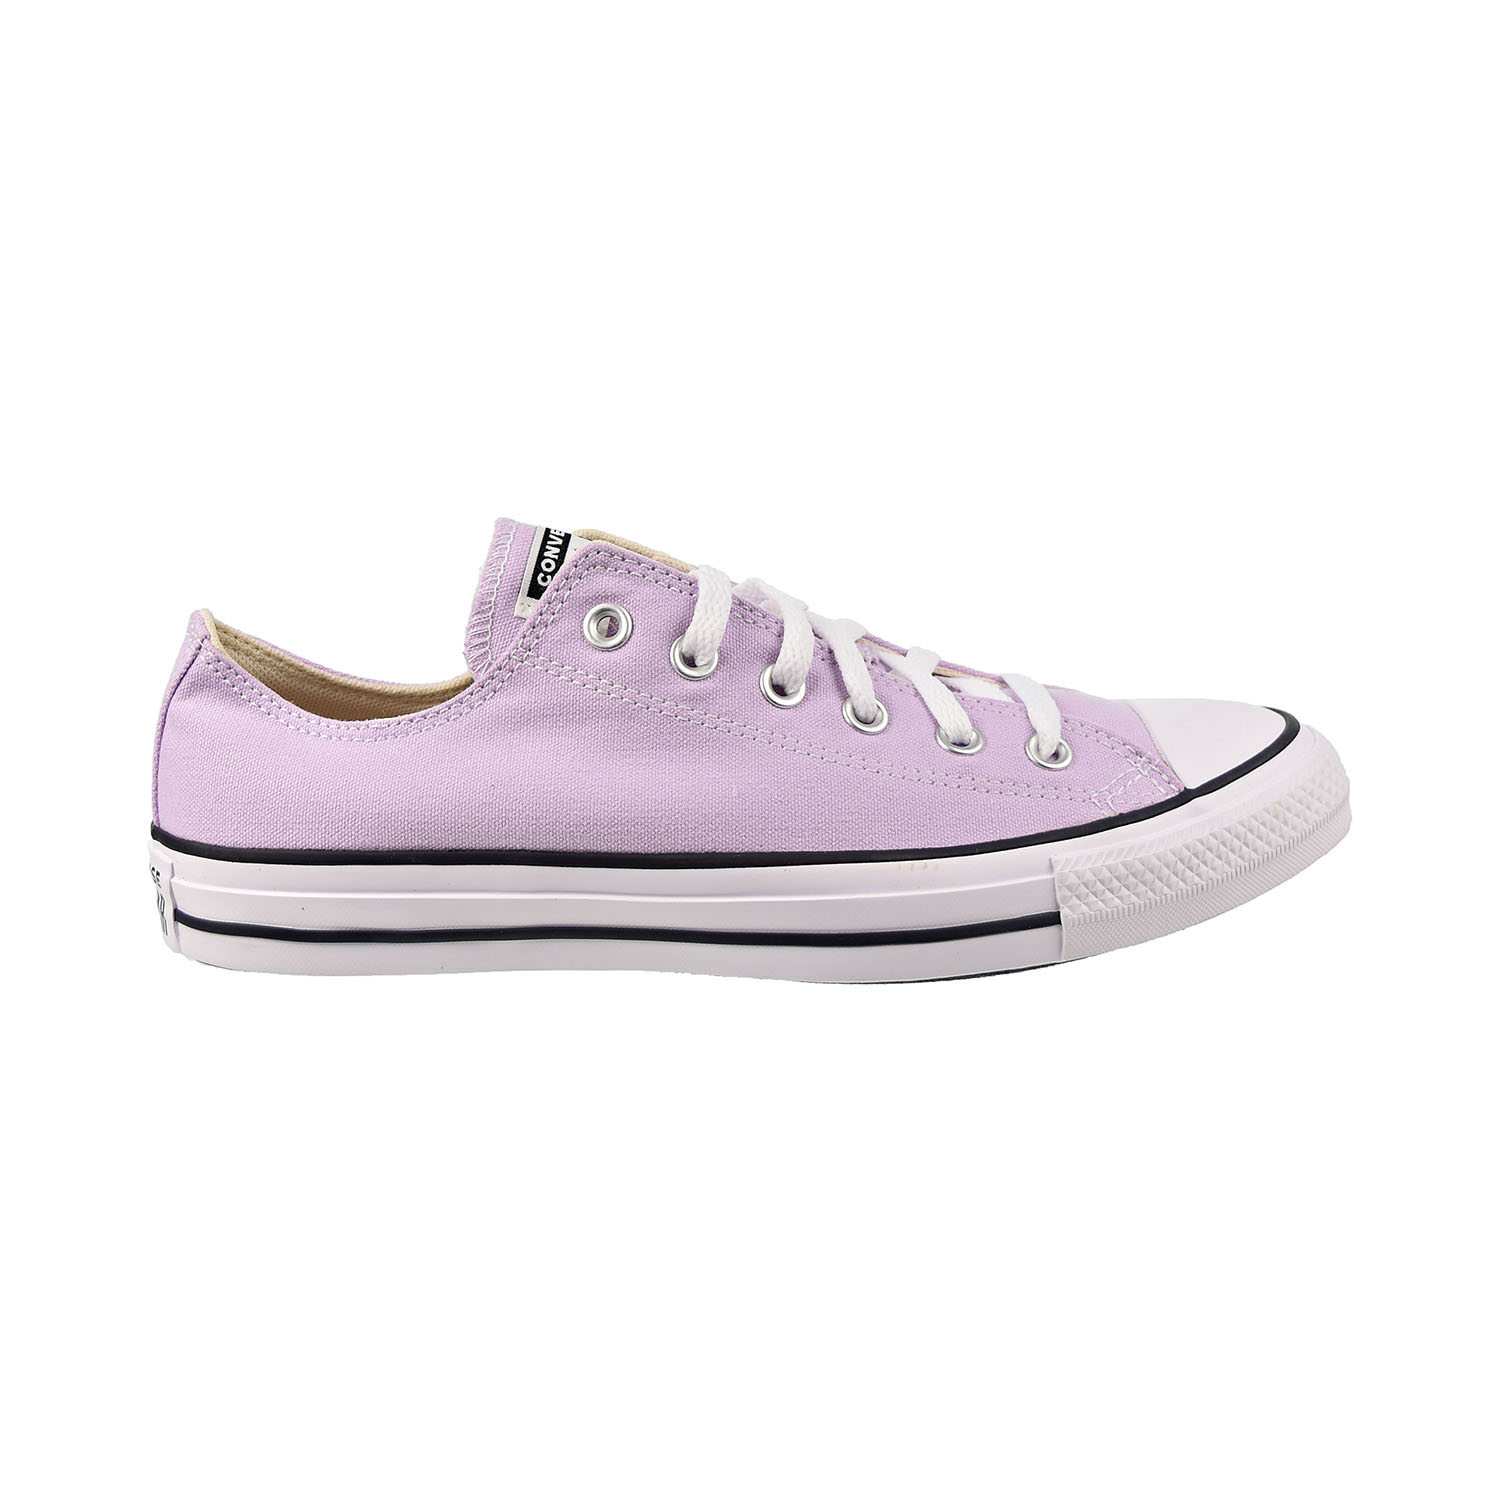 Converse Chuck Taylor All Star Ox Men's Shoes Lilac Mist 166266f